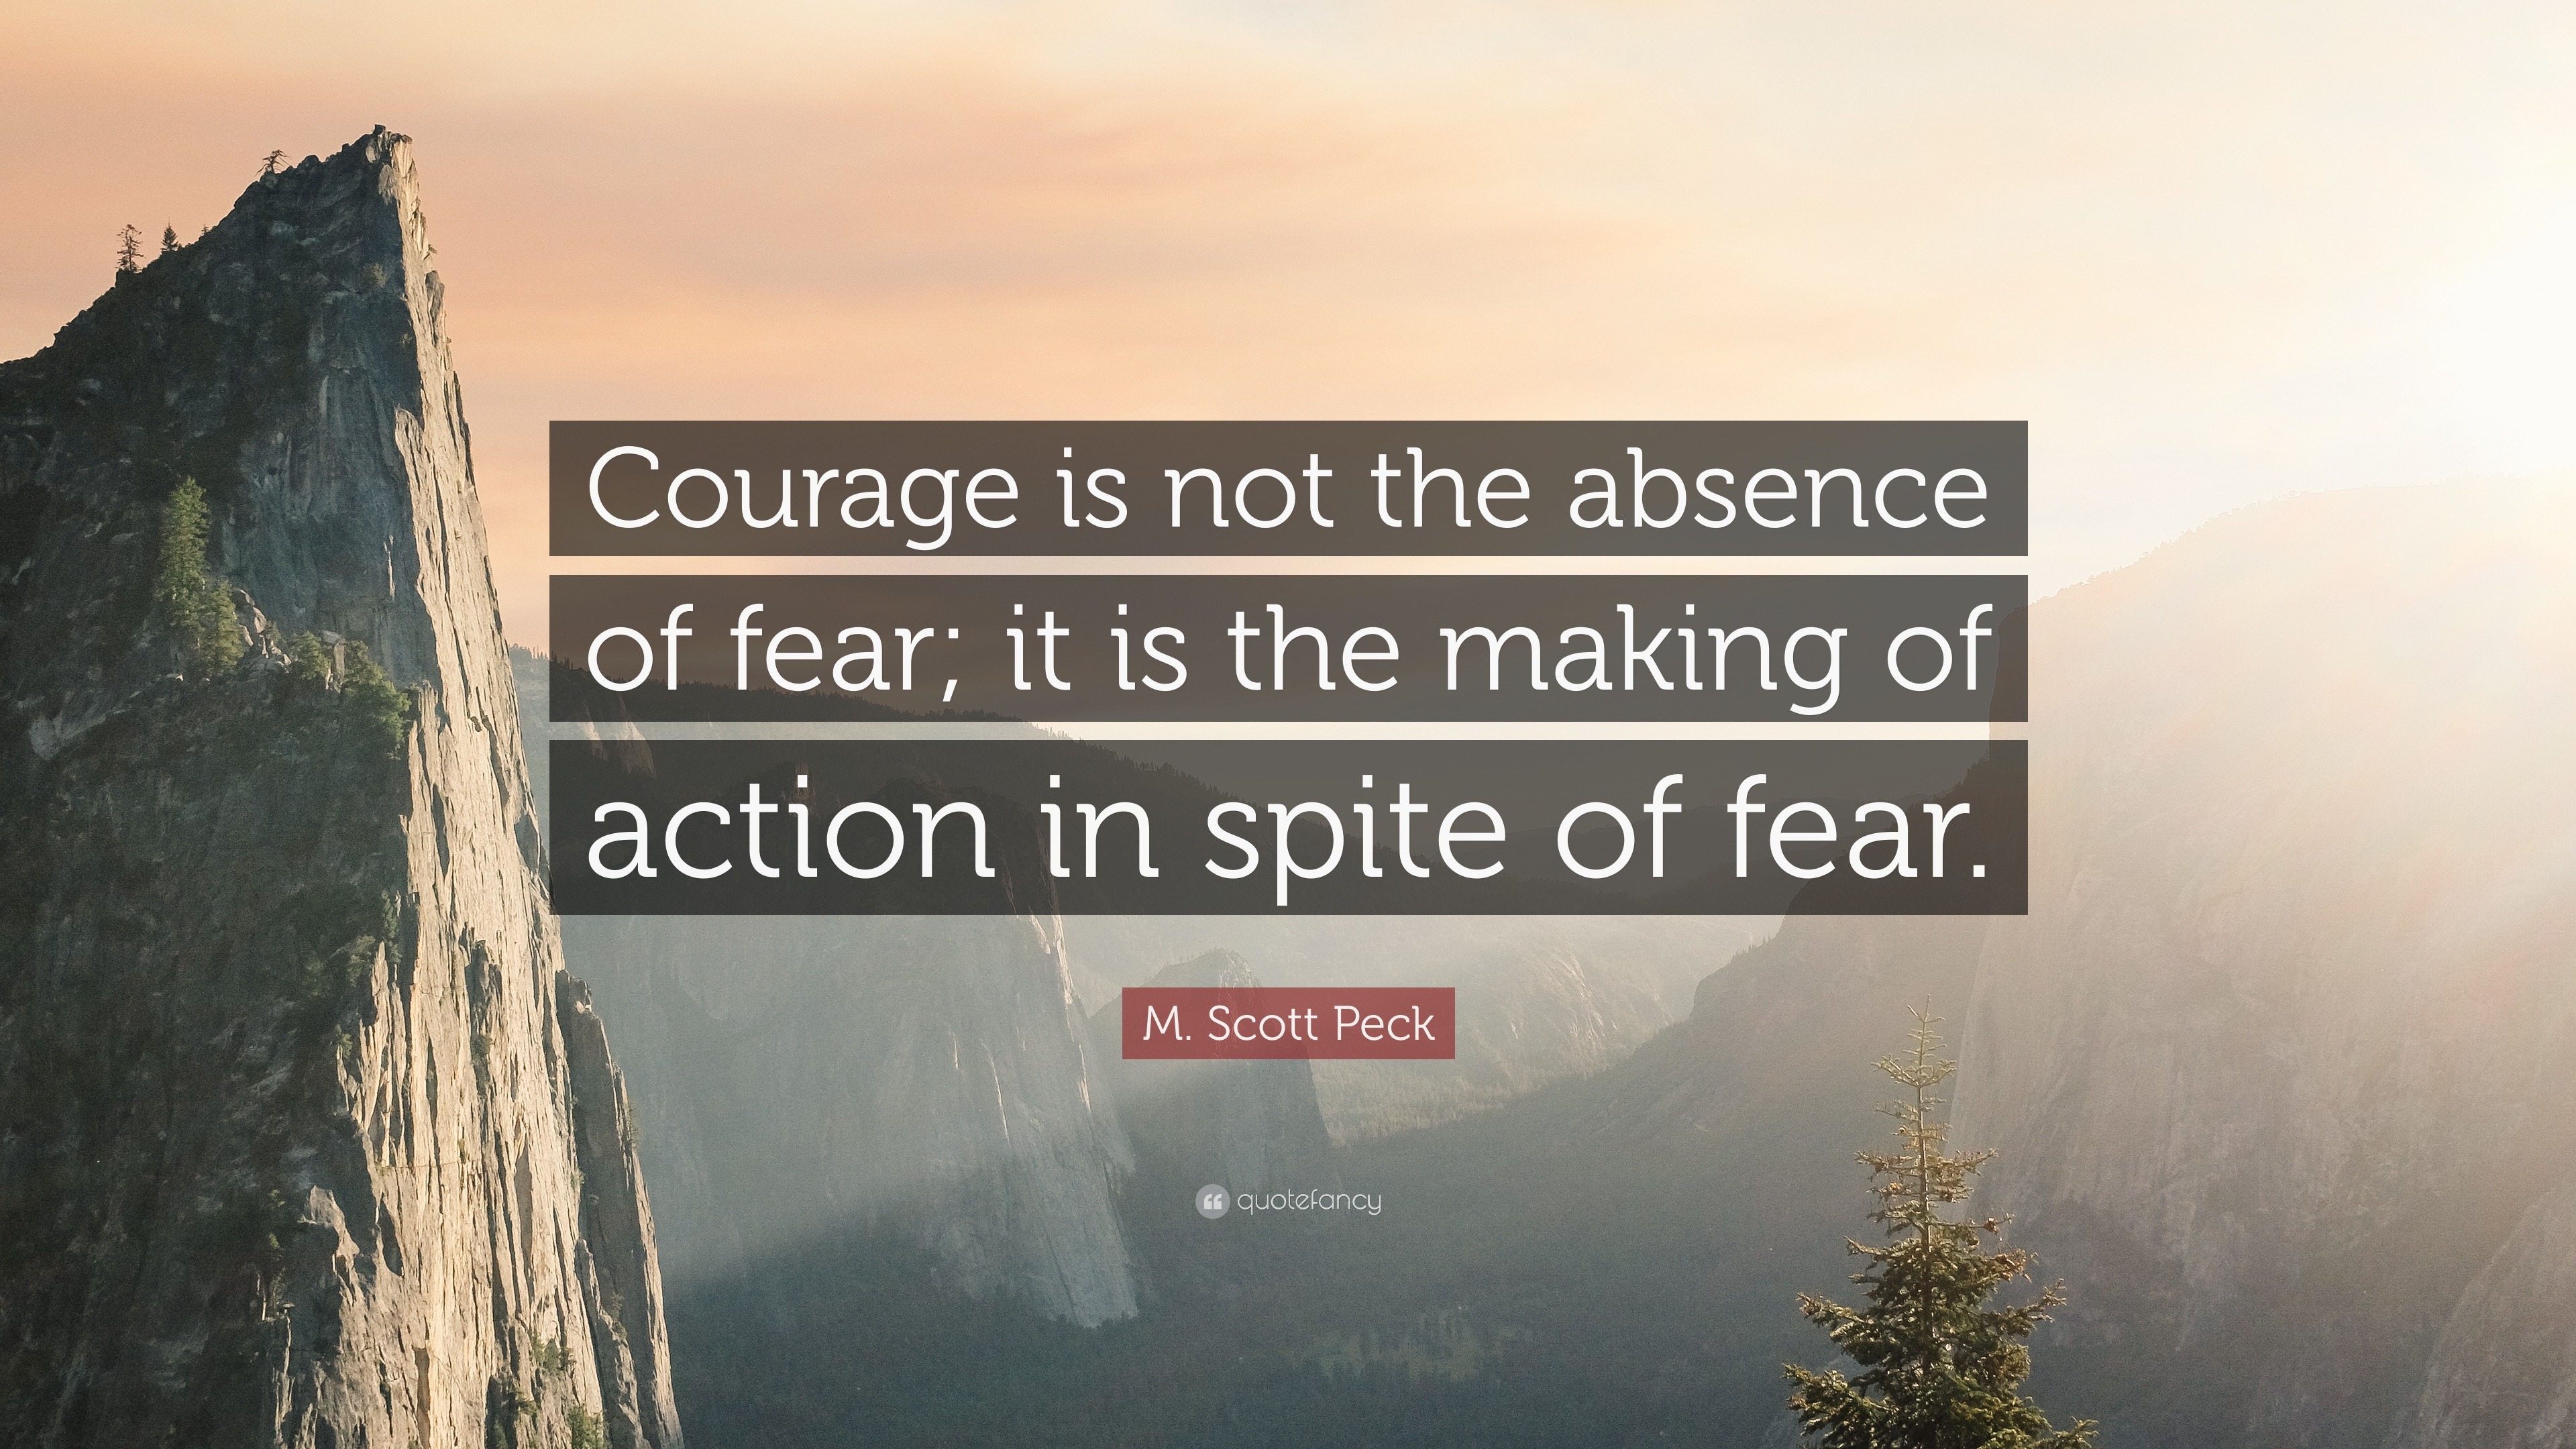 M. Scott Peck Quote: “Courage is not the absence of fear; it is the ...